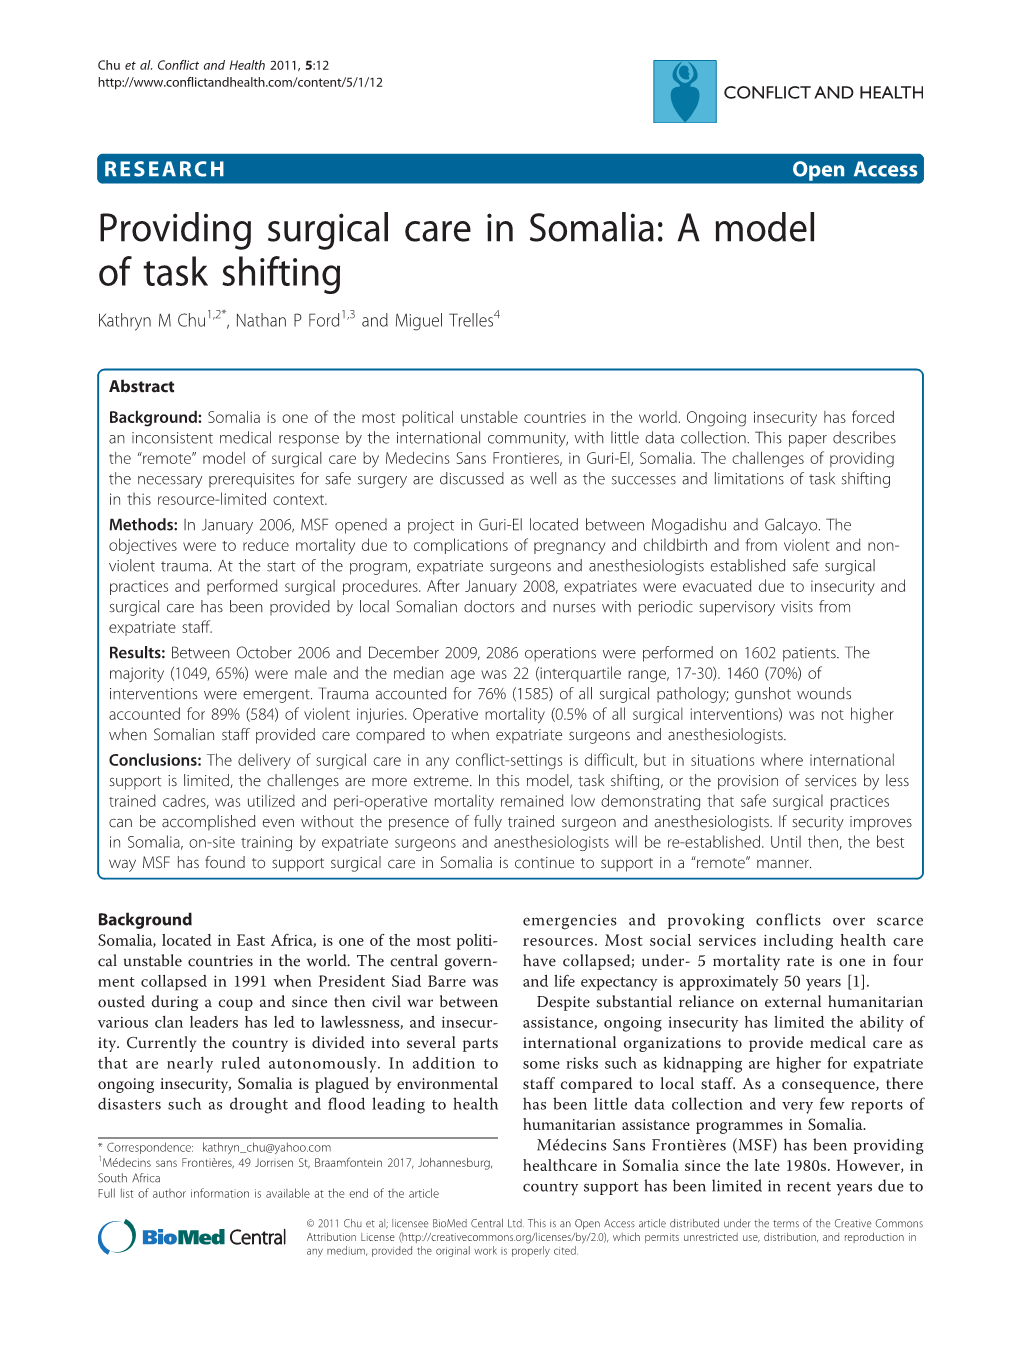 Providing Surgical Care in Somalia: a Model of Task Shifting Kathryn M Chu1,2*, Nathan P Ford1,3 and Miguel Trelles4